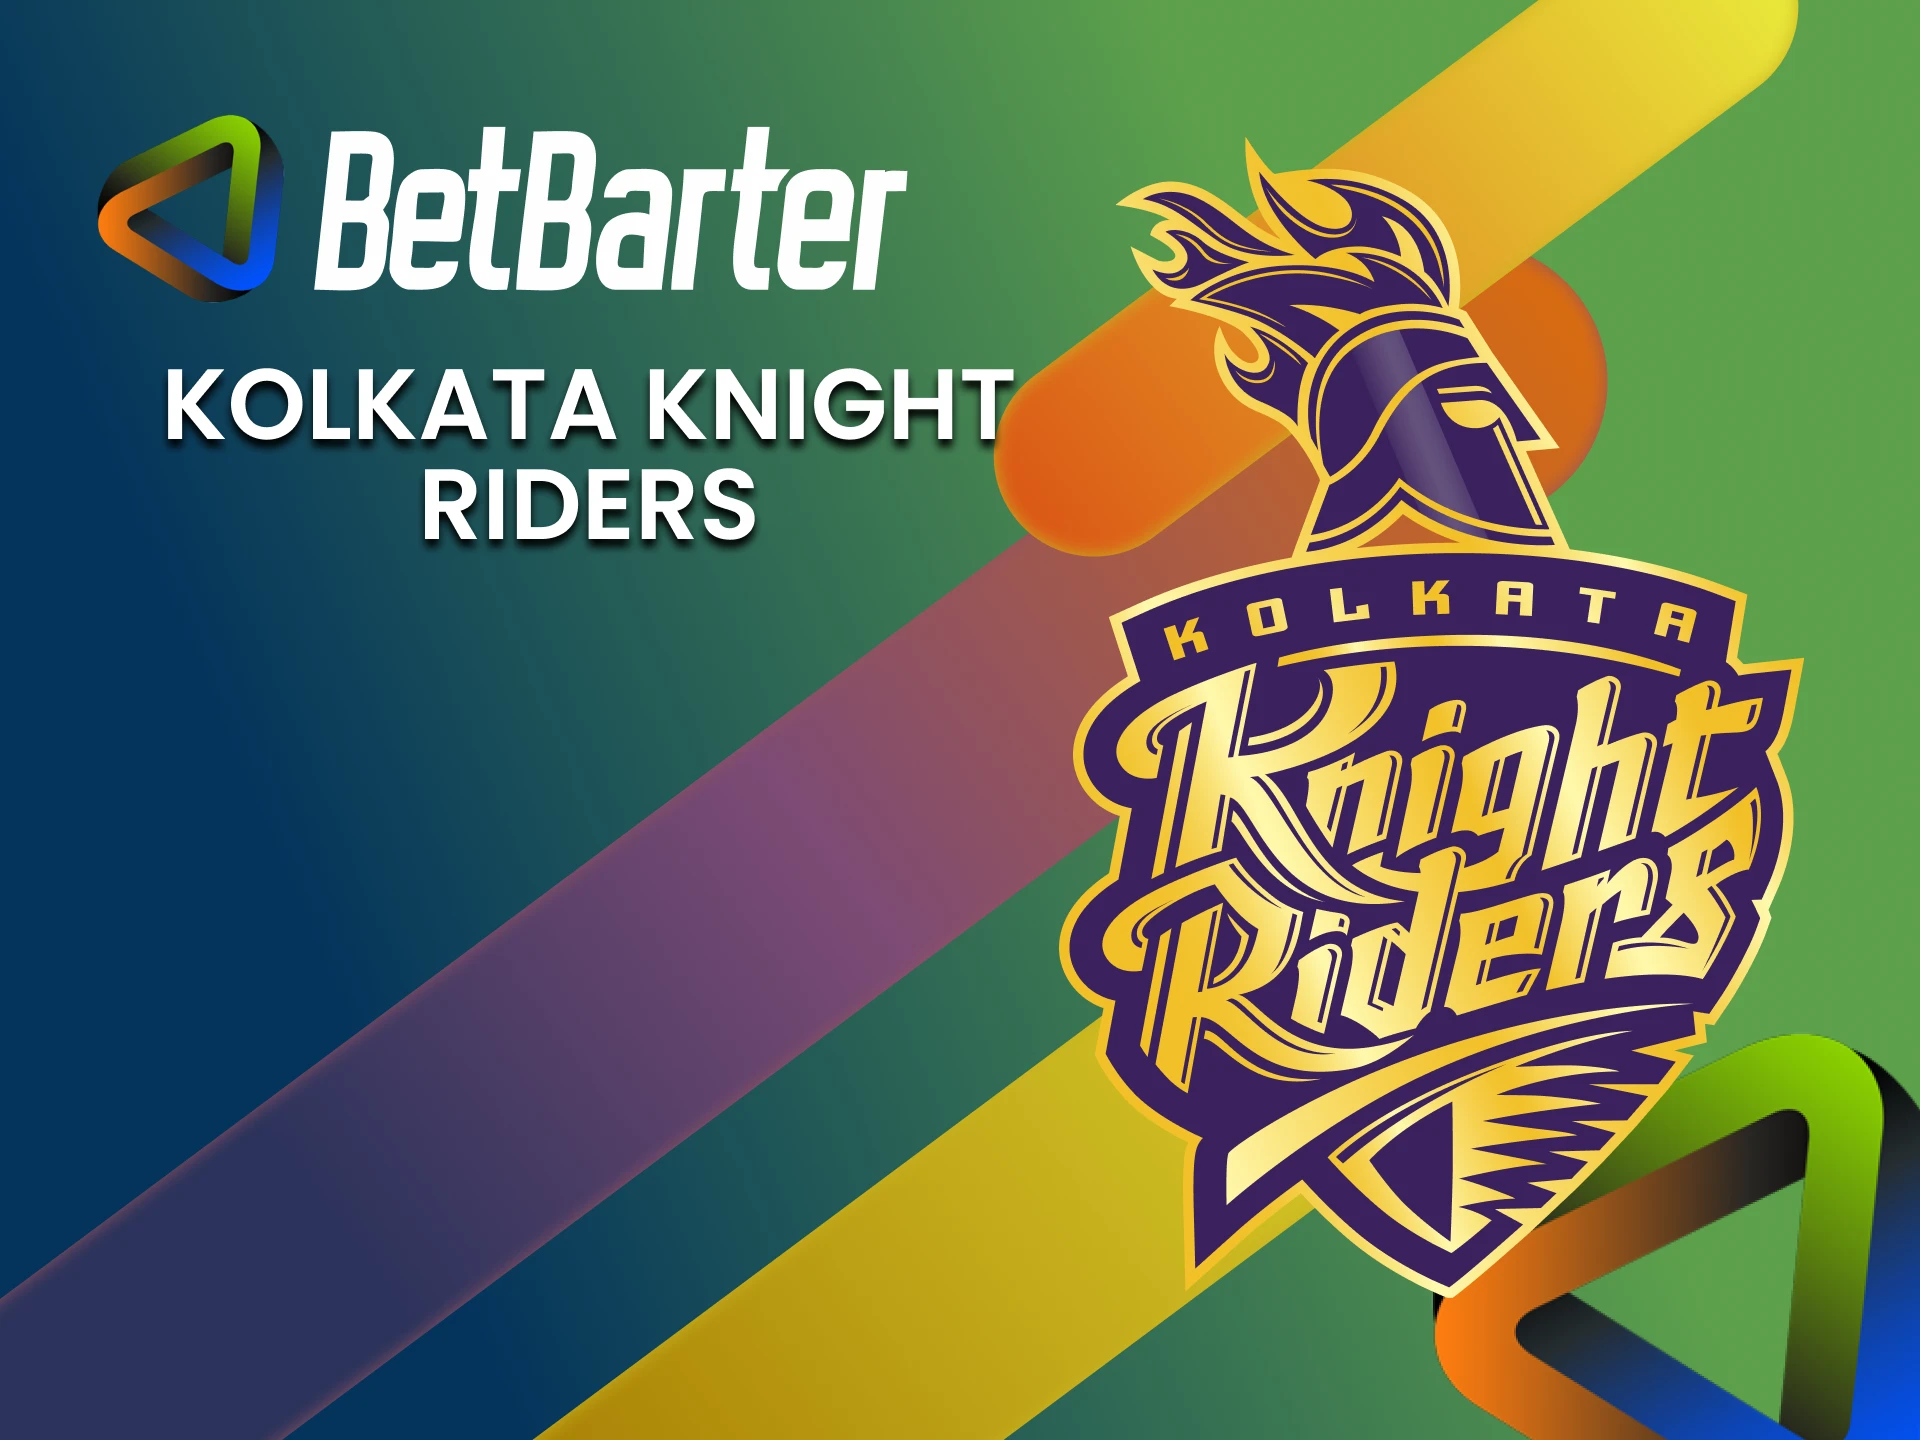 To bet on the IPL from BetBarter, choose the Kolkata Knight Riders team.